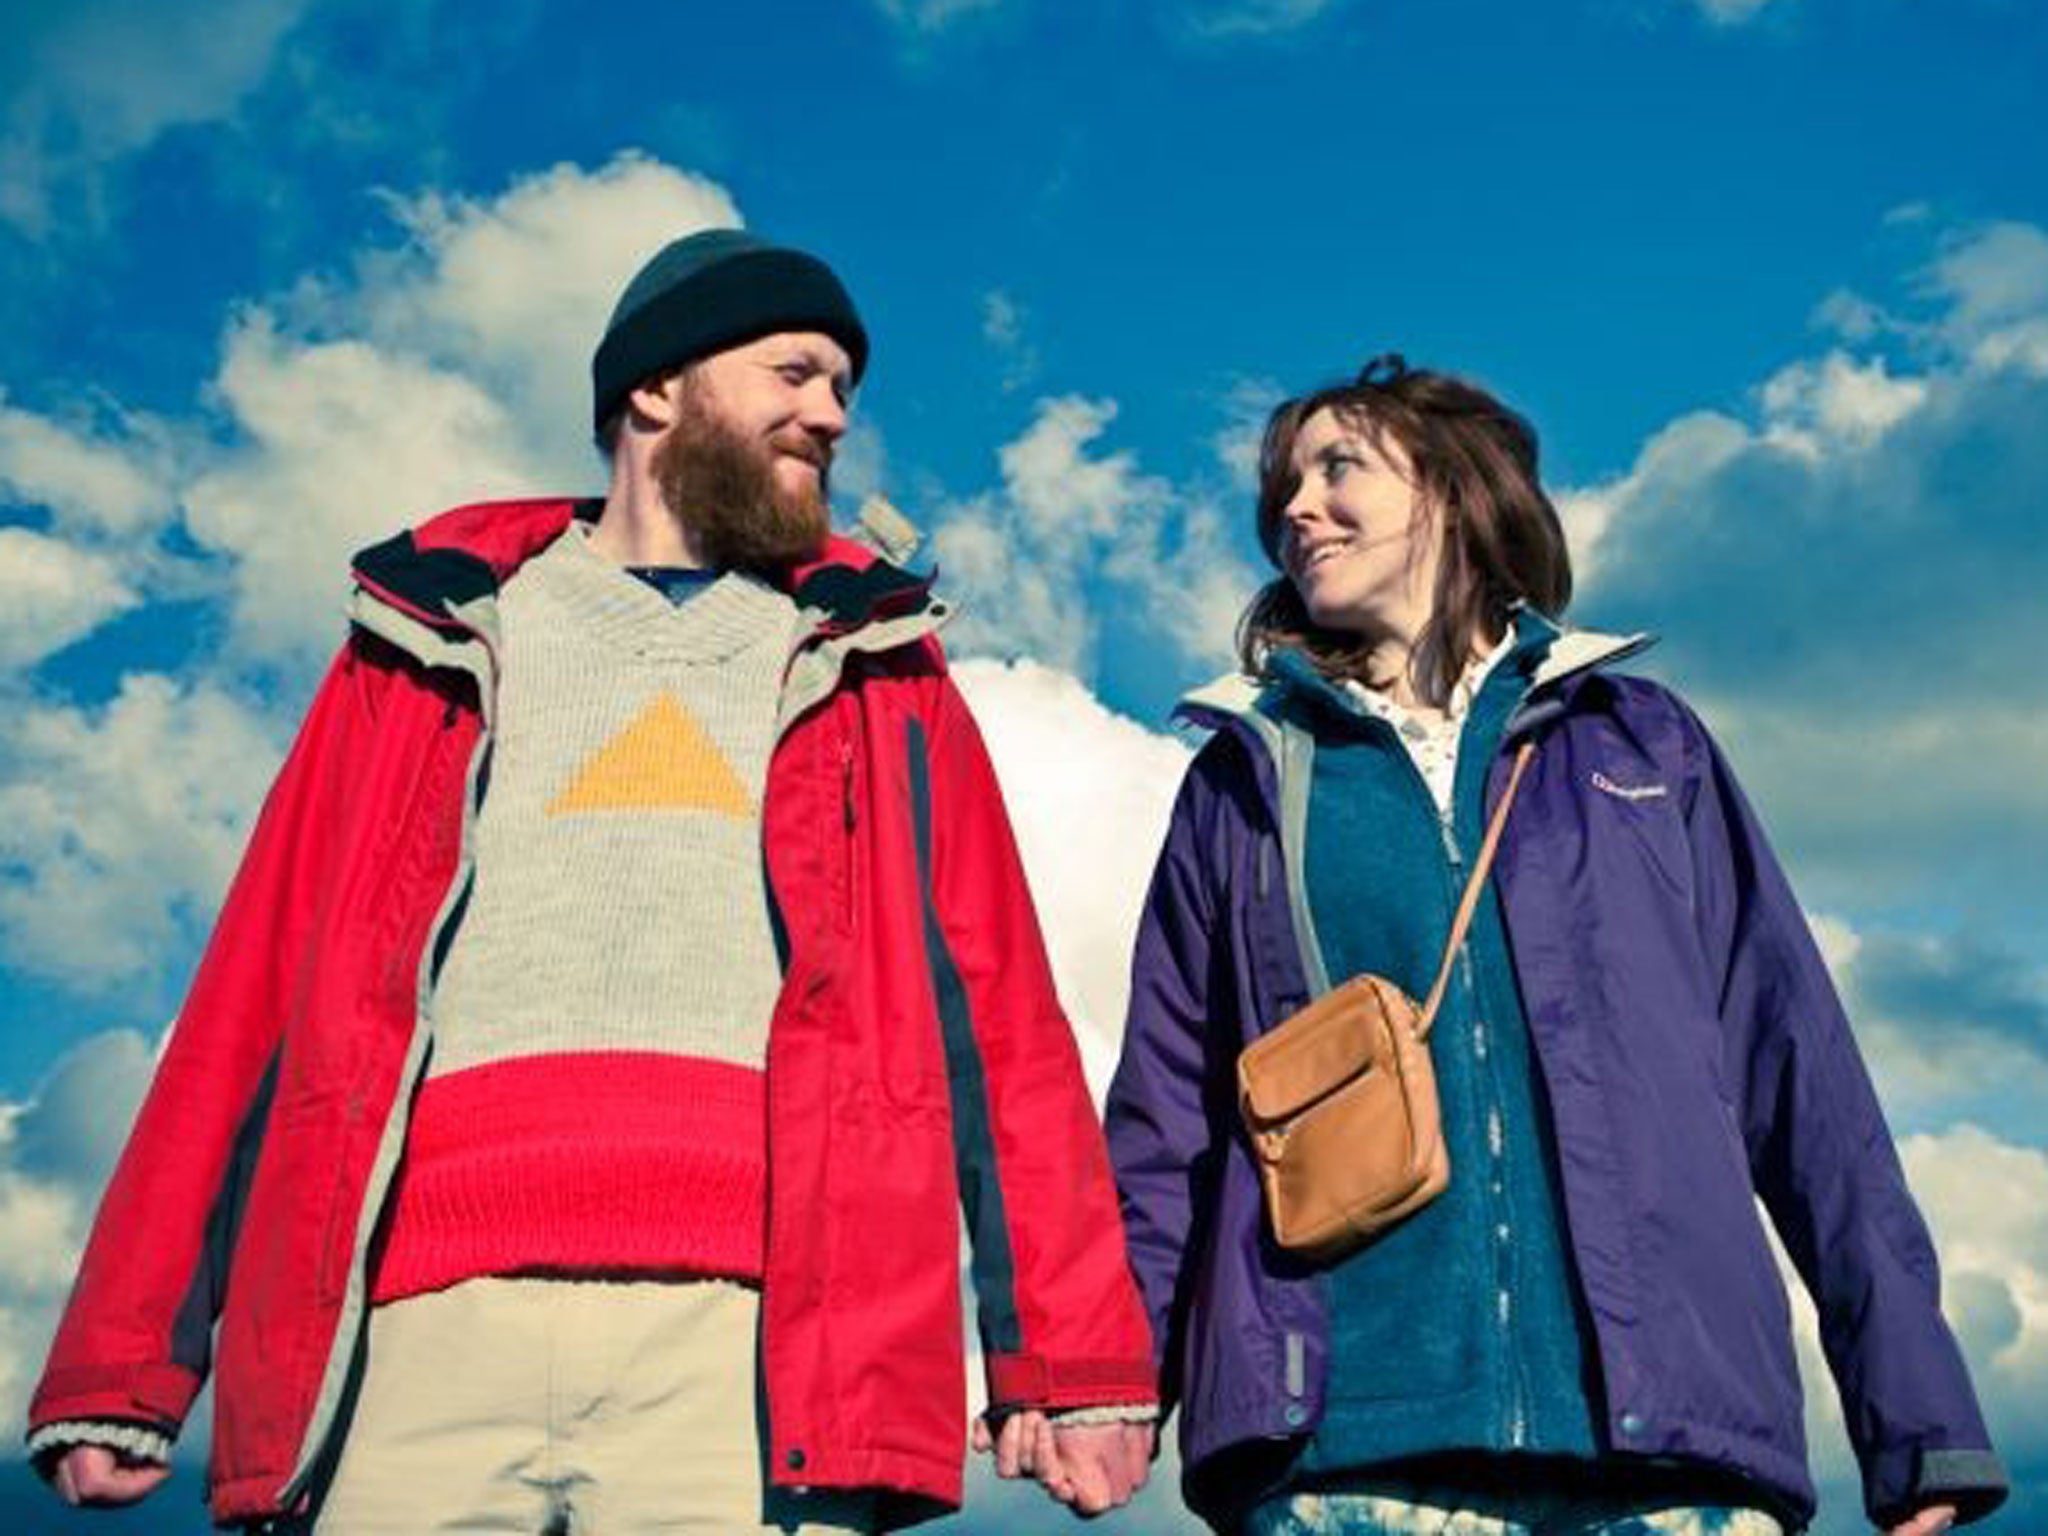 DVD & Blu-ray review: Sightseers (15)